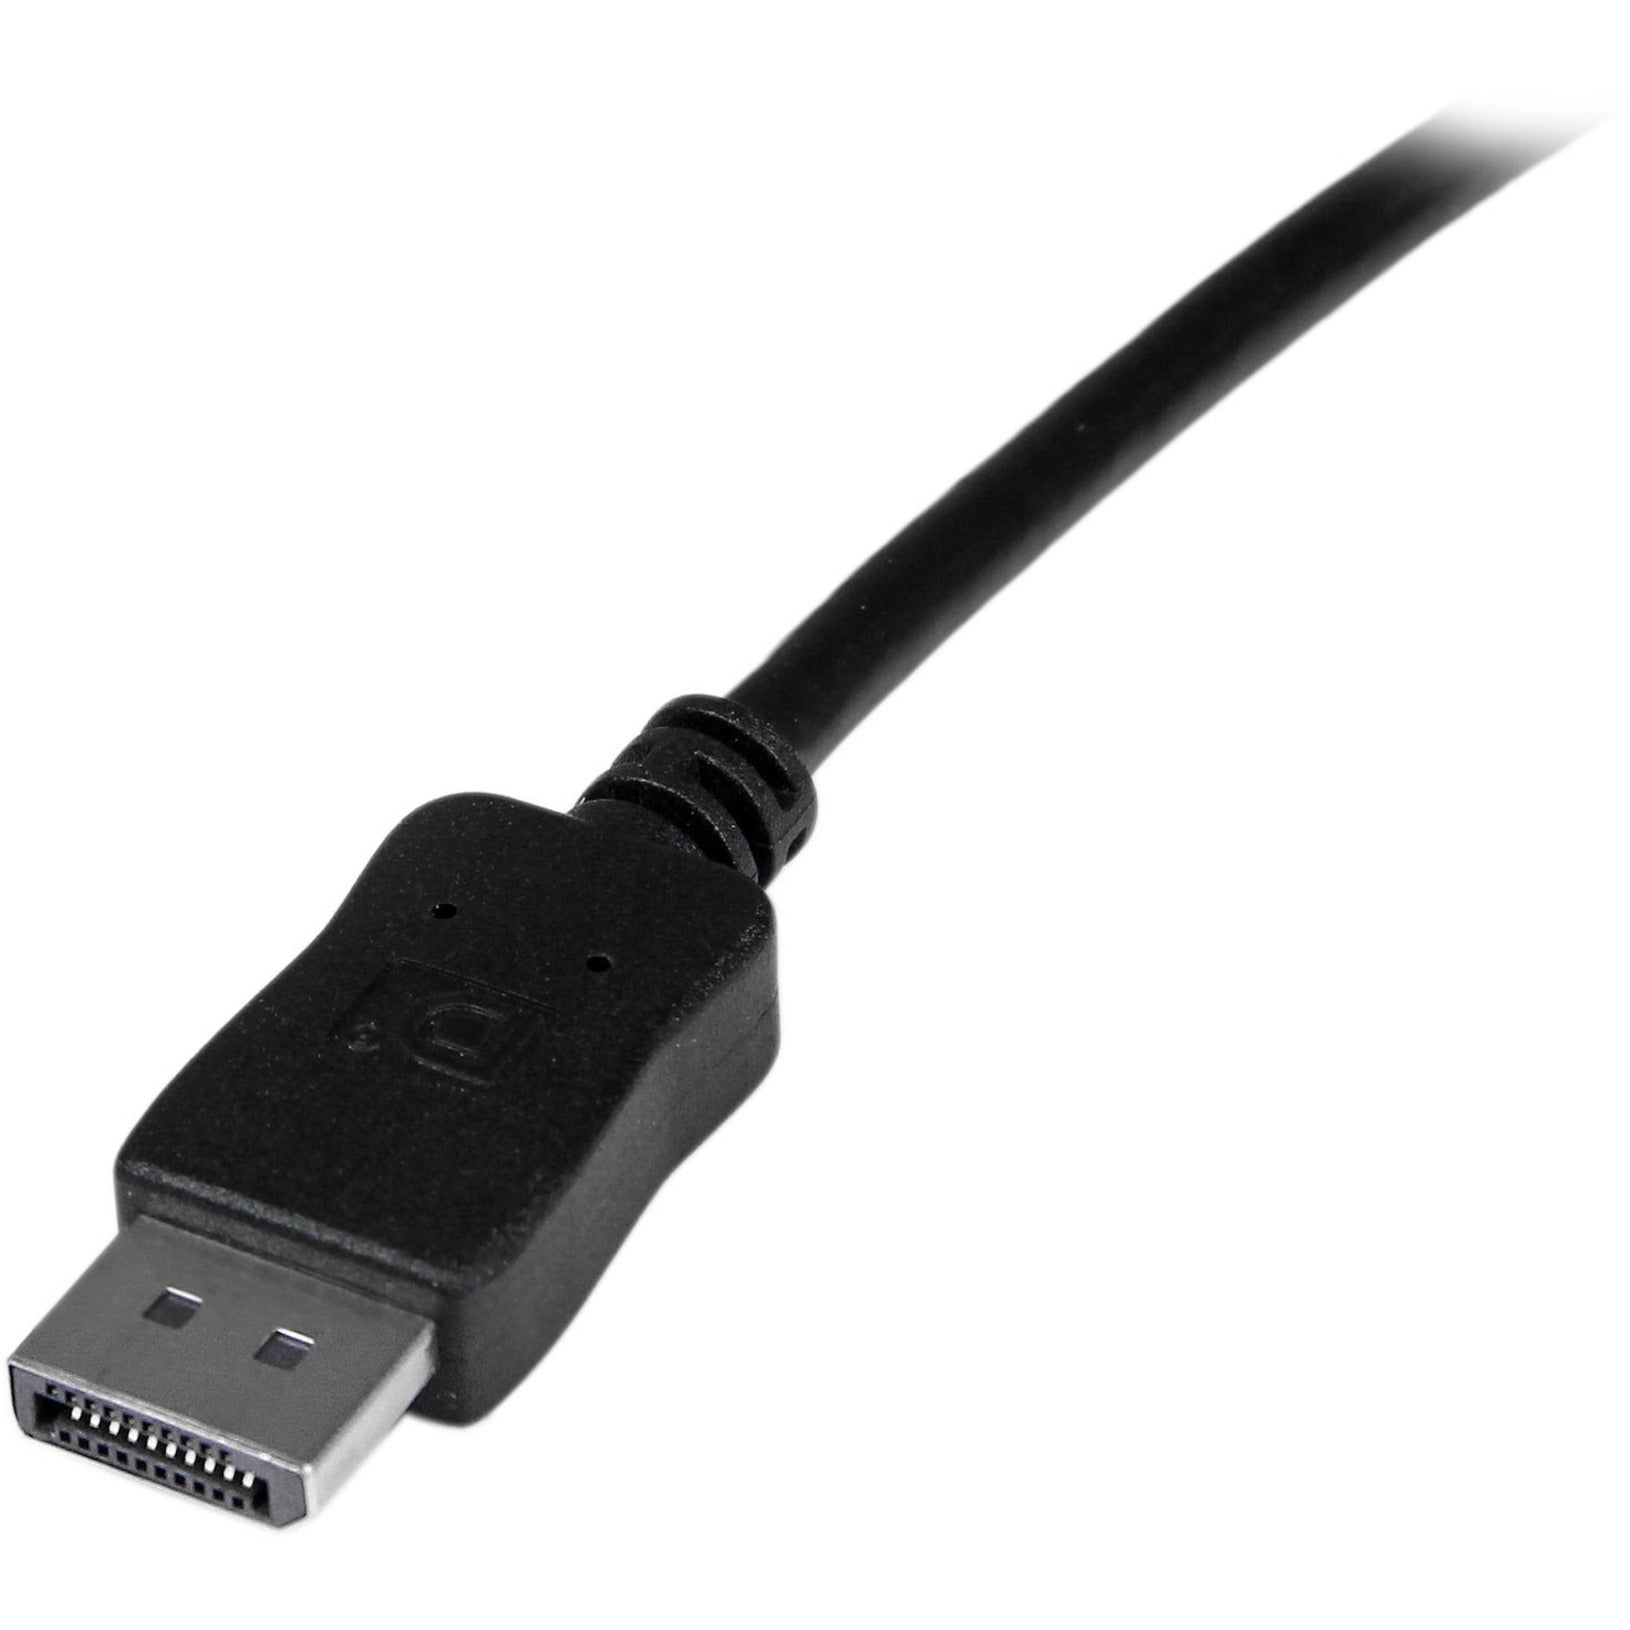 StarTech.com DISPL10MA 10m Active DisplayPort Cable - DP to DP M/M, 32.81 ft Video Cable, 10.8 Gbit/s Data Transfer Rate, 3840 x 2400 Supported Resolution